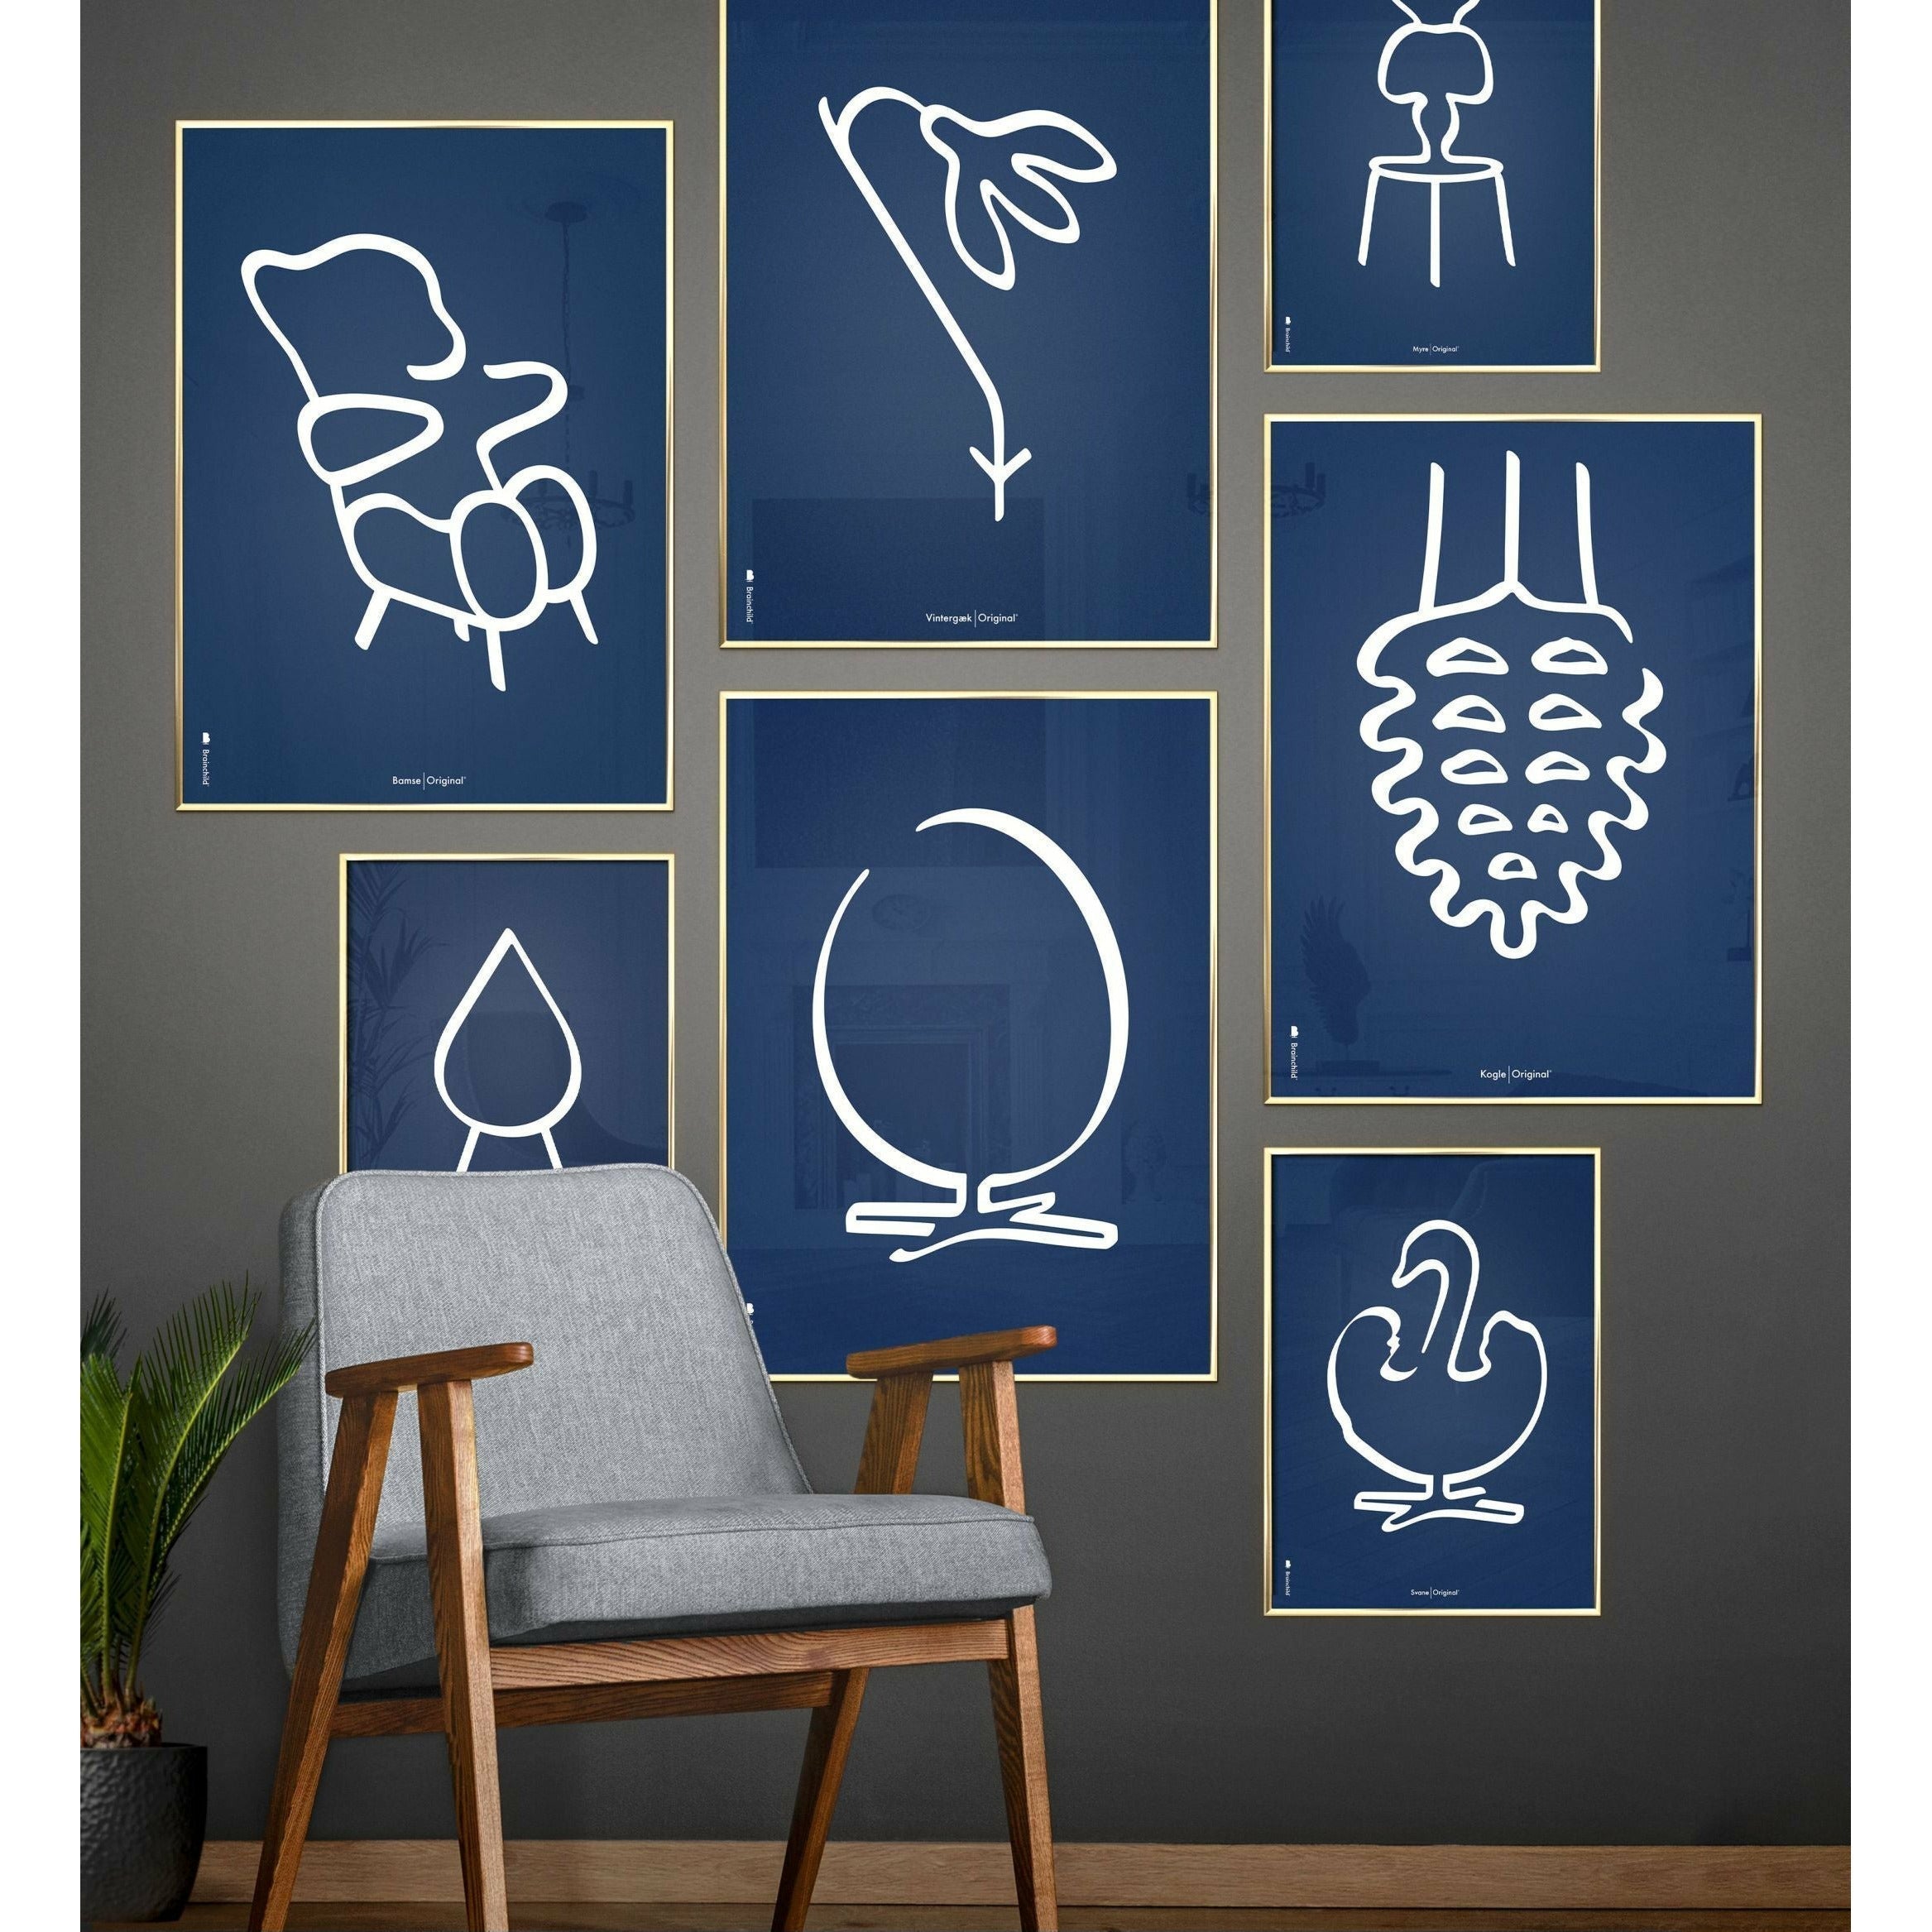 Brainchild Swan Line Poster, Frame Made Of Black Lacquered Wood 30x40 Cm, Blue Background